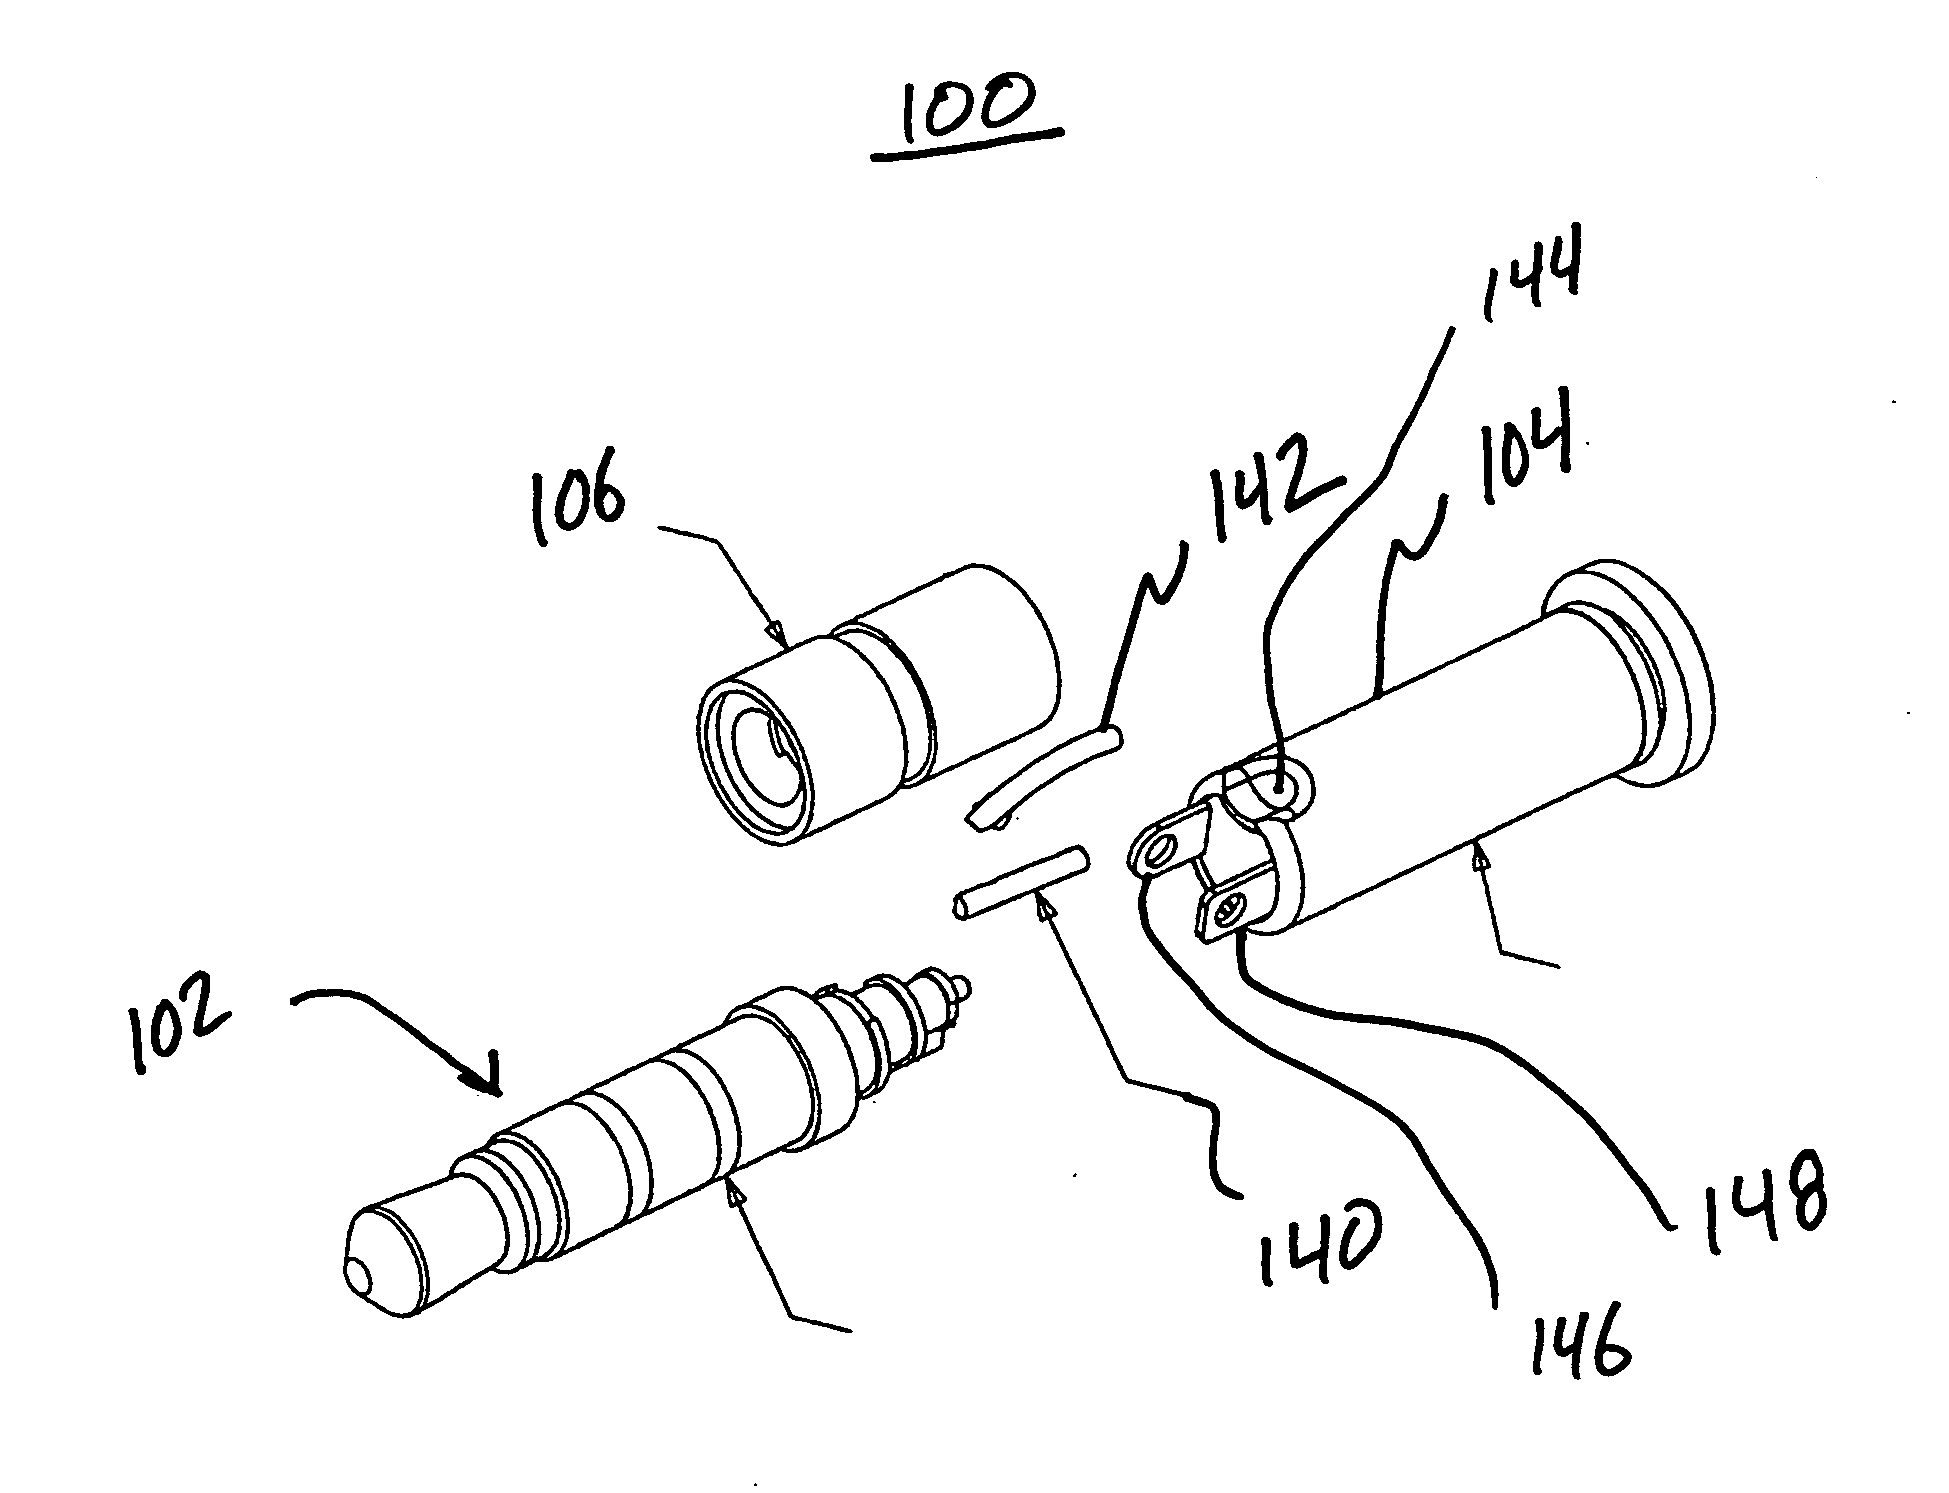 Apparatus and methods for connecting two electrical devices together